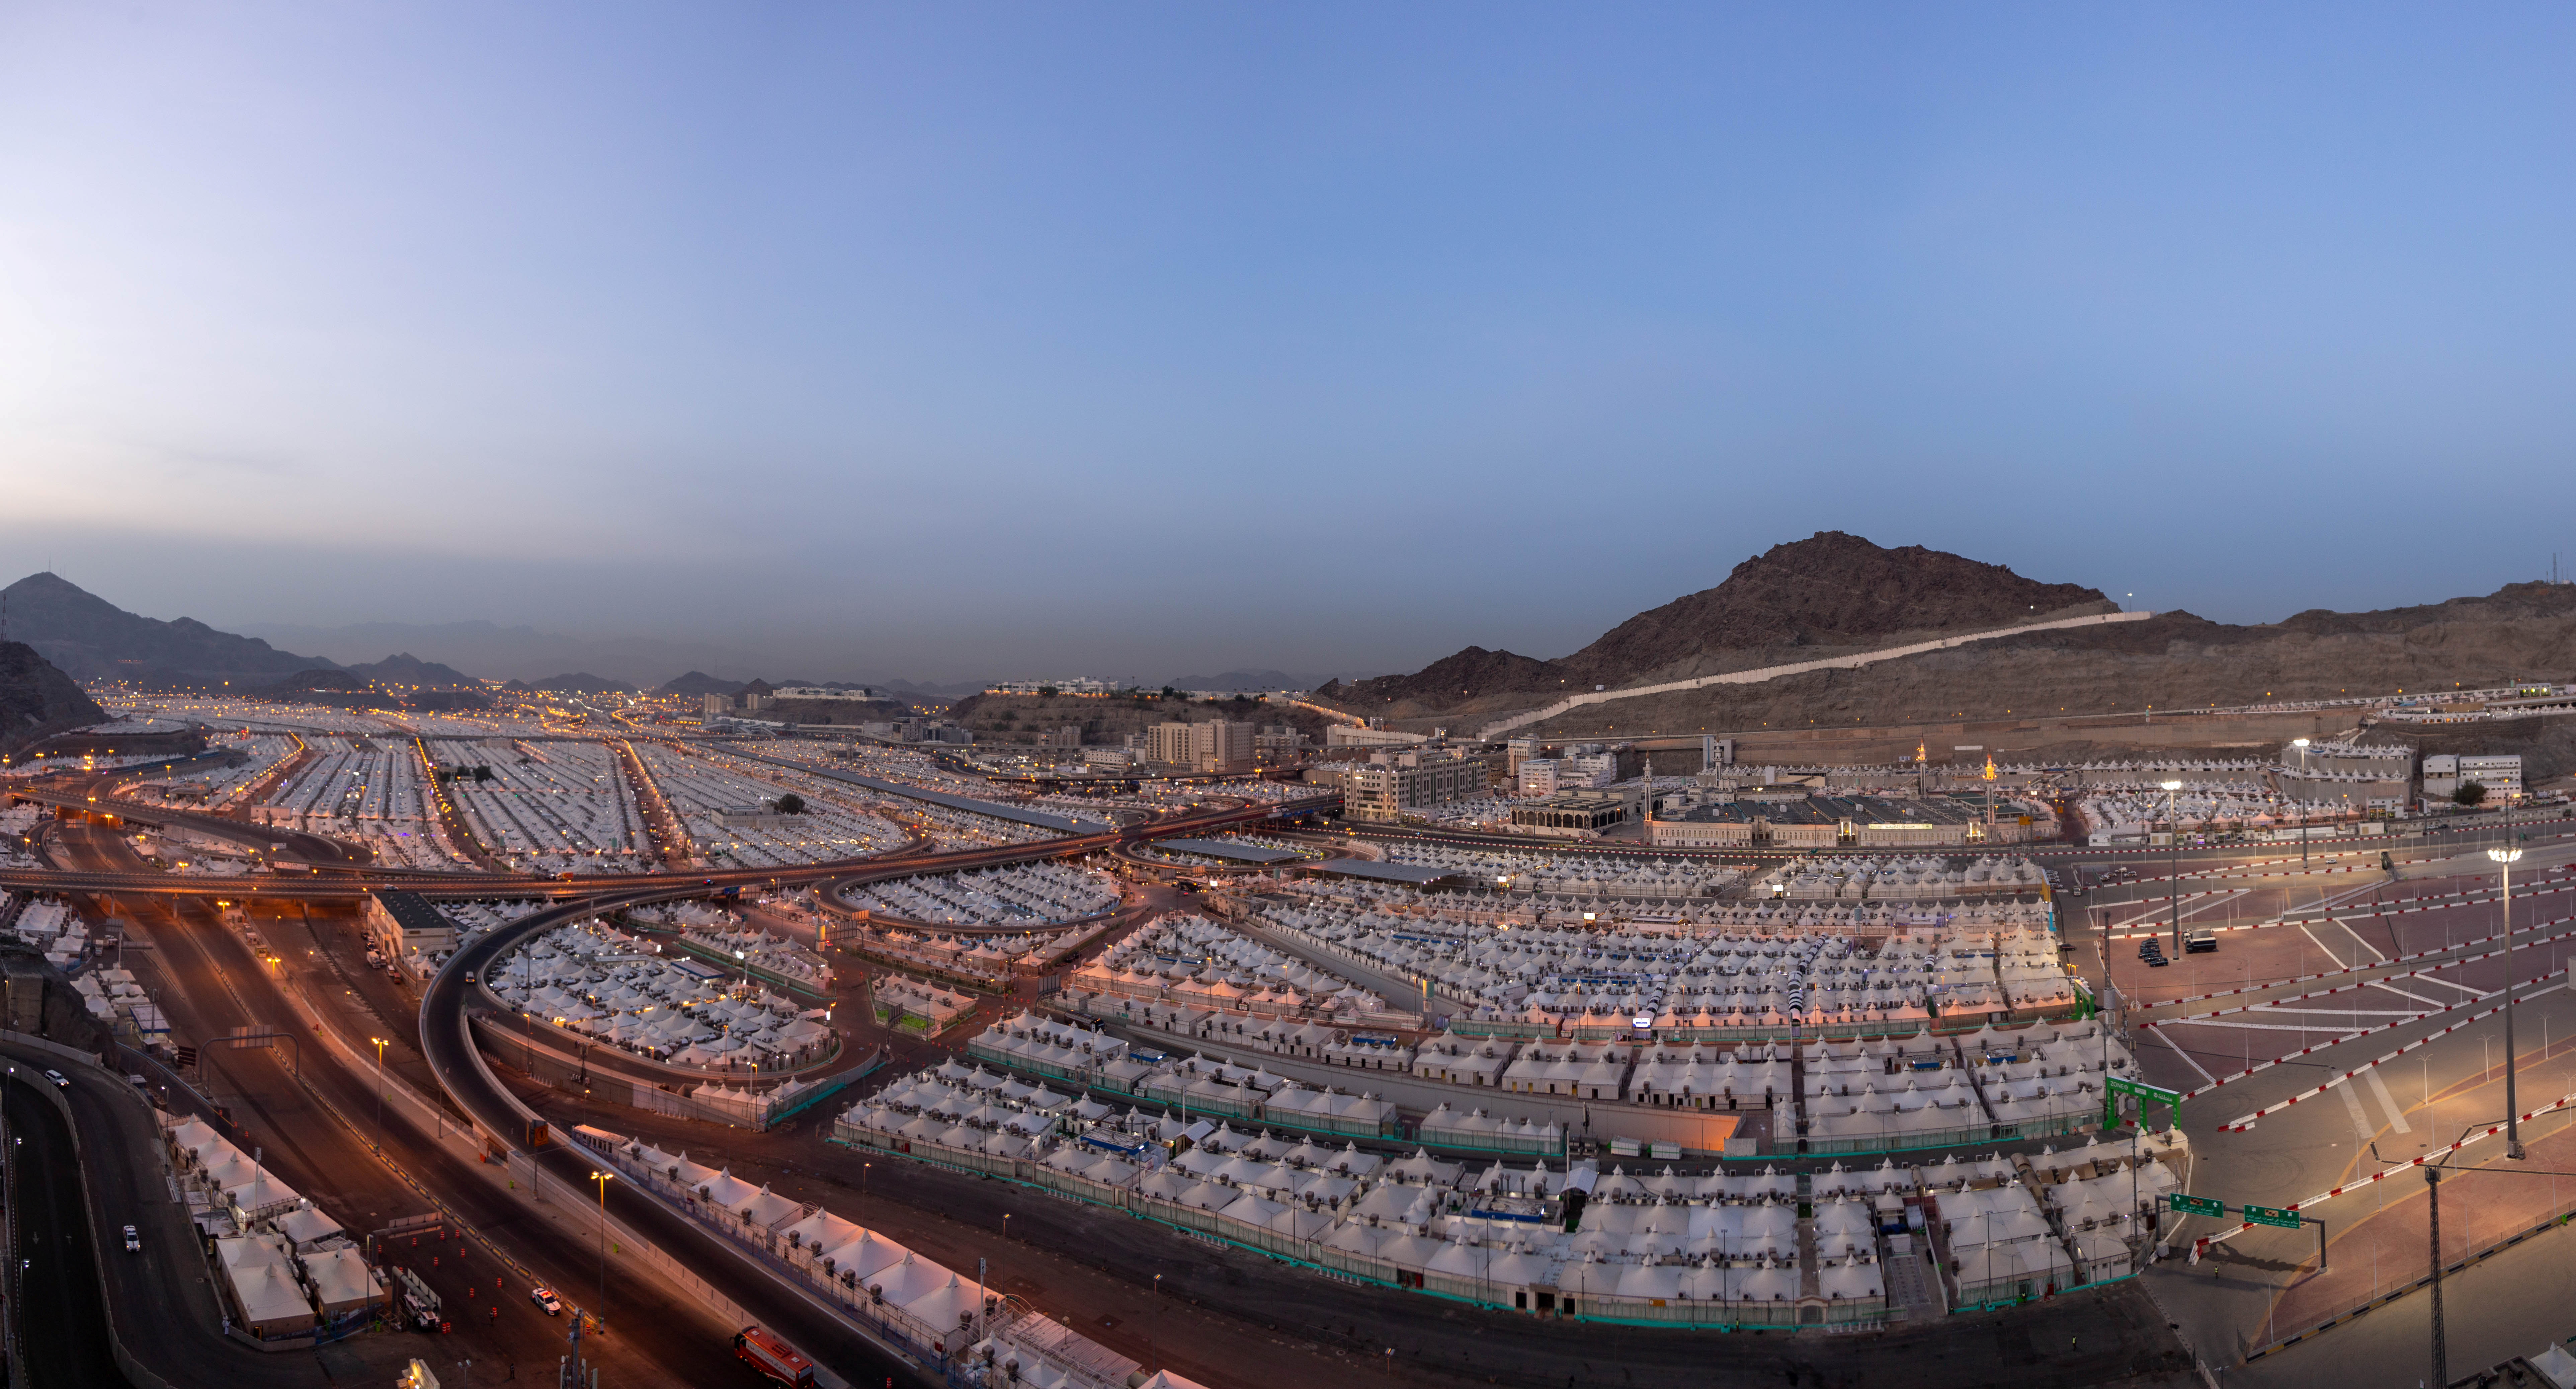 Aerial view of Mina area ahead of the annual Haj pilgrimage, in the holy city of Mecca